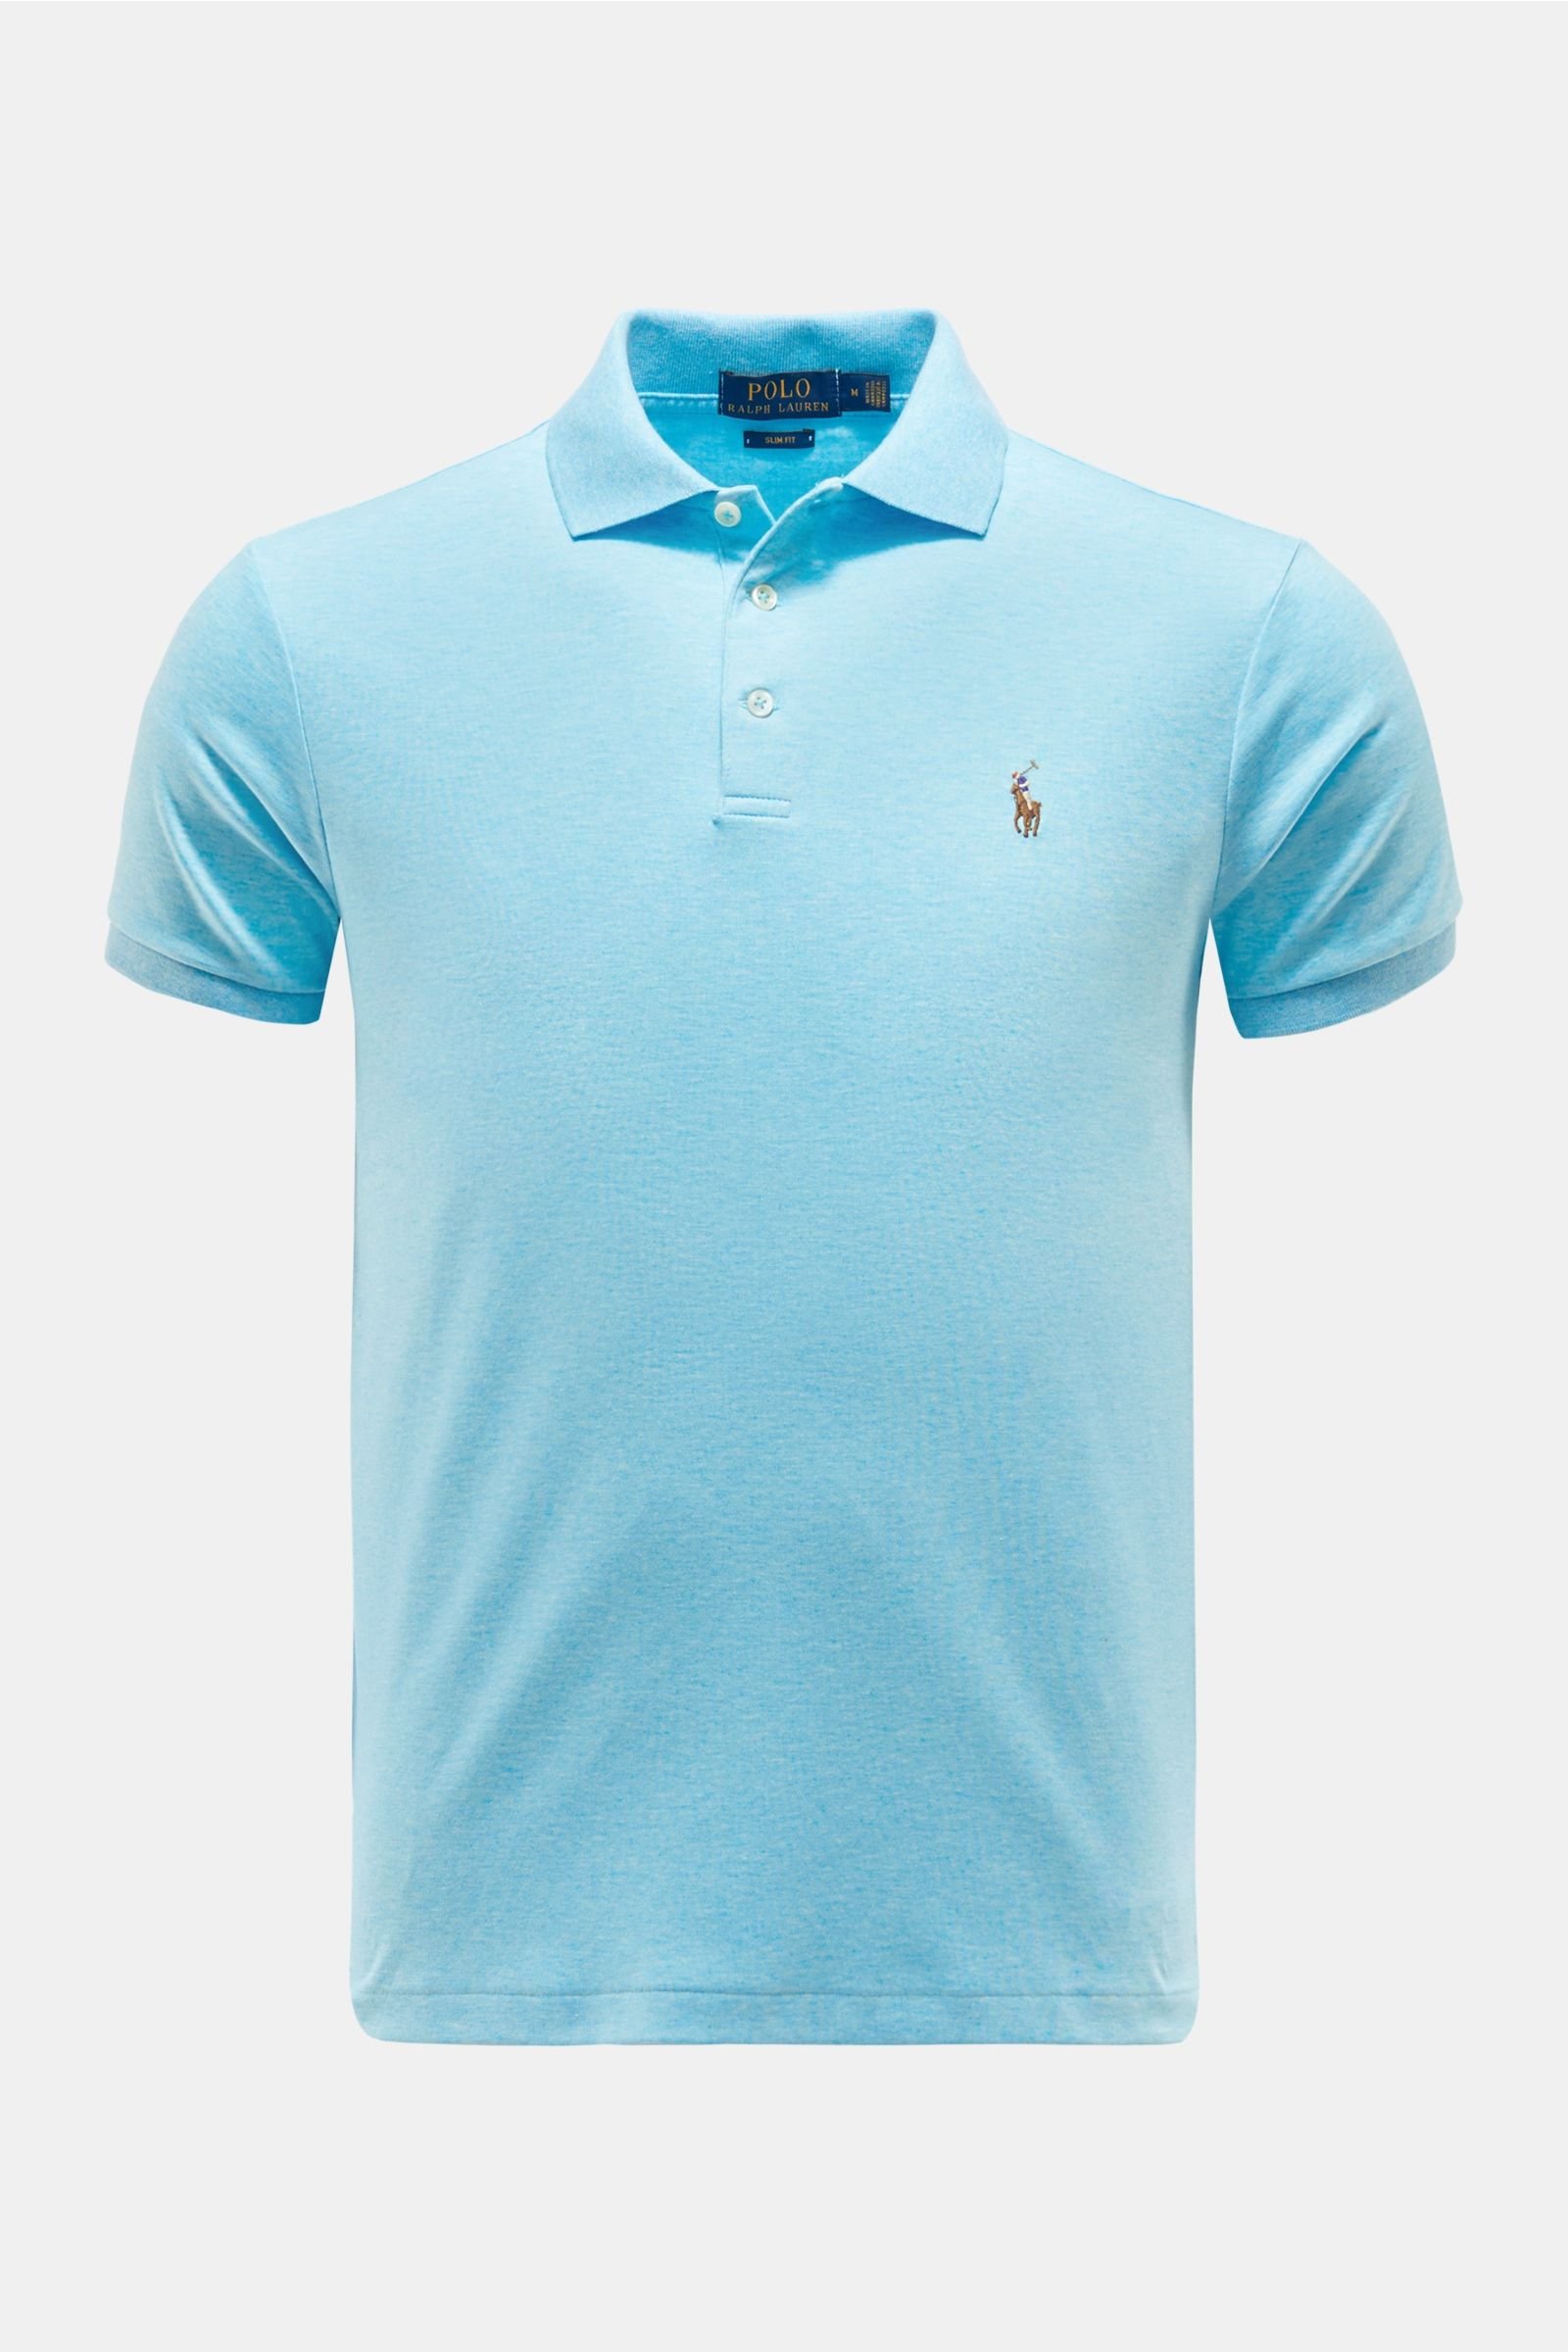 Jersey polo shirt turquoise